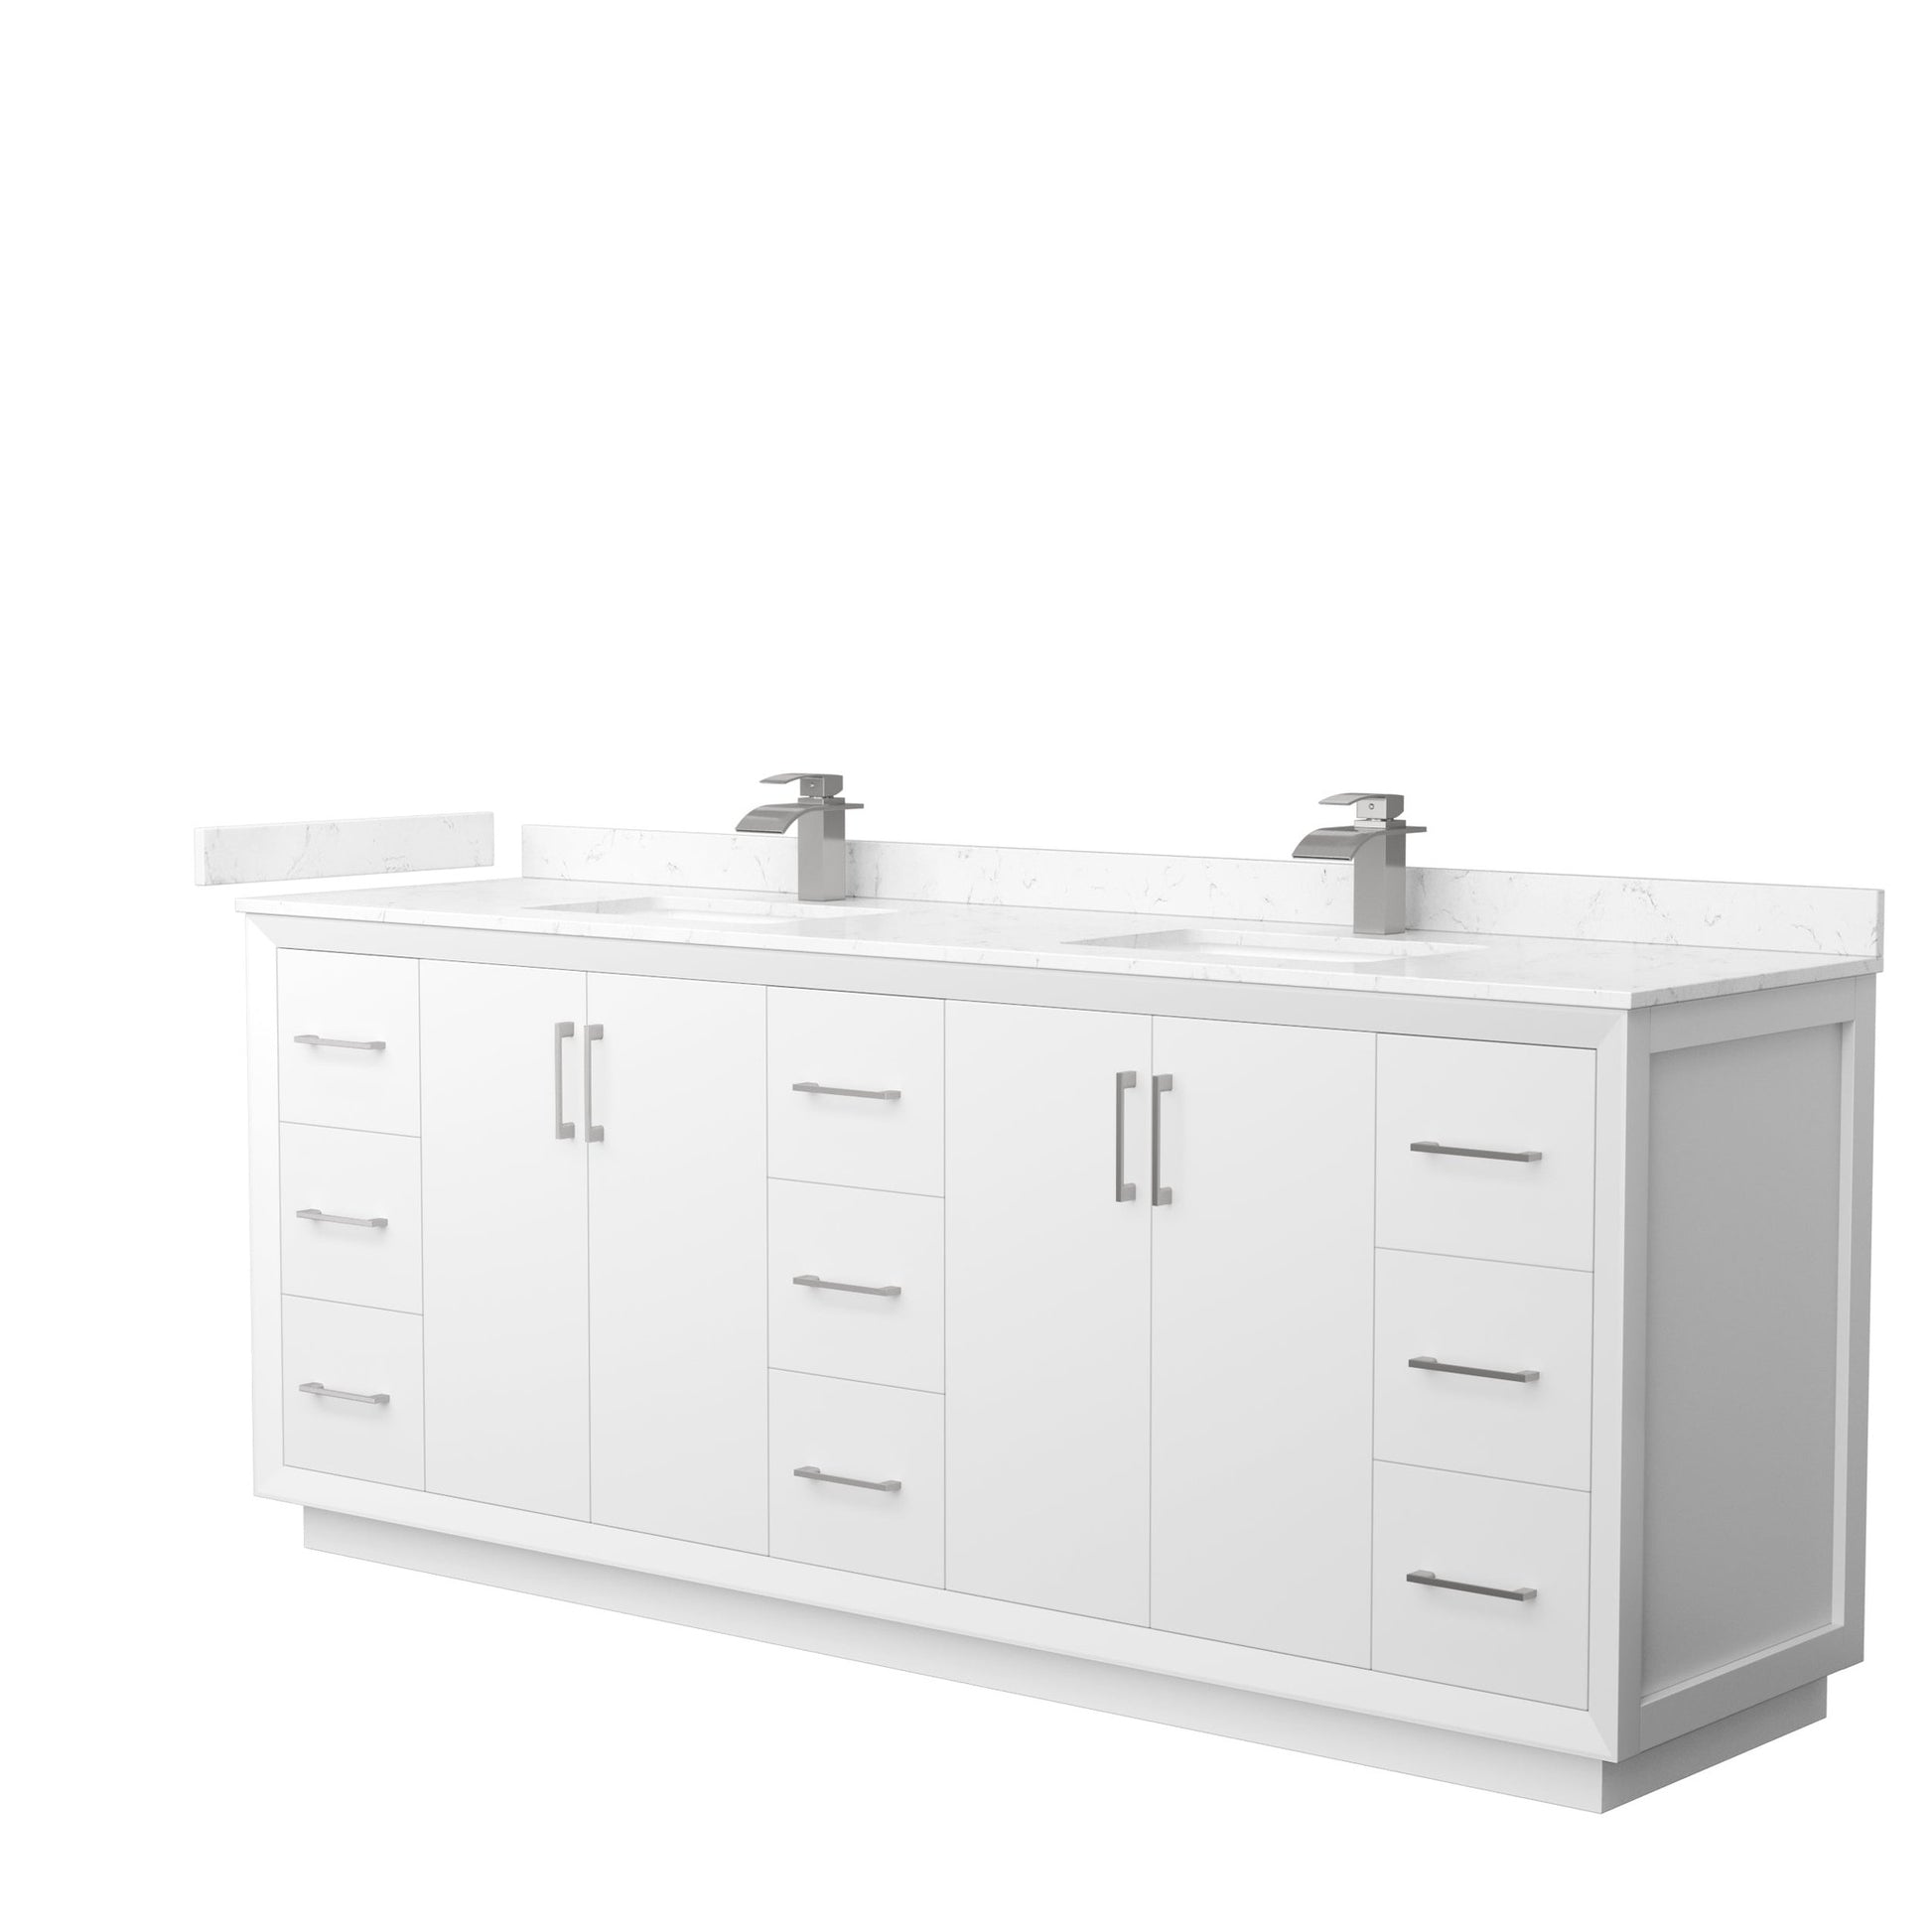 Wyndham Collection Strada 84" Double Bathroom Vanity in White, Carrara Cultured Marble Countertop, Undermount Square Sink, Brushed Nickel Trim